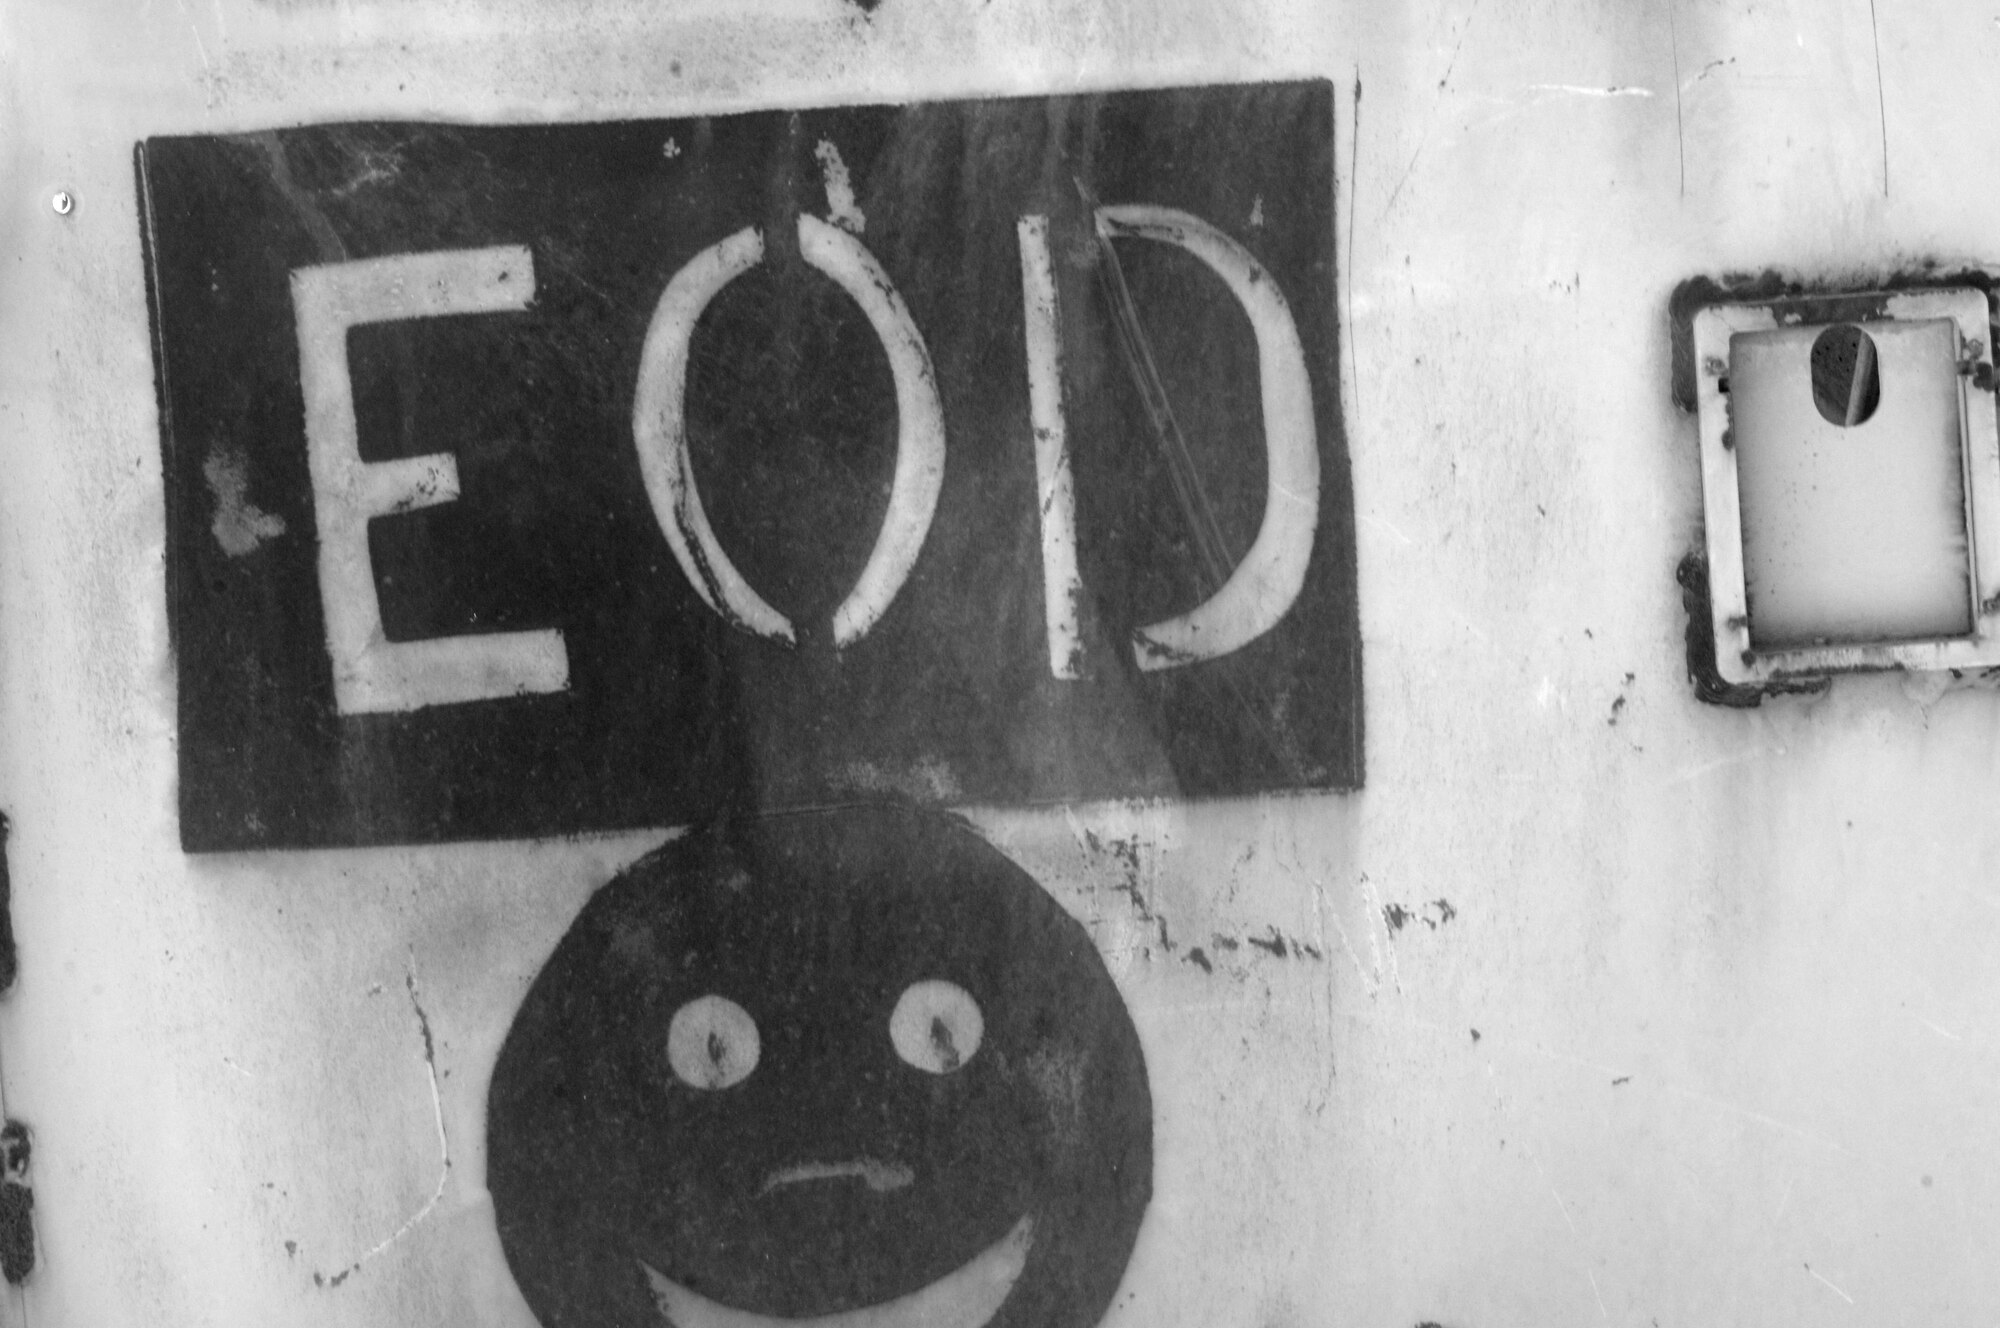 An explosive ordnance disposal logo is painted on an old vehicle door at one of the ranges on Ali Air Base, Iraq. U.S. Army and Air Force EOD technicians save the government money by disposing of unserviceable ammunition on base as opposed to shipping it back to the United States. (U.S. Air Force photo by Staff Sgt. R. Michael Longoria/Released)